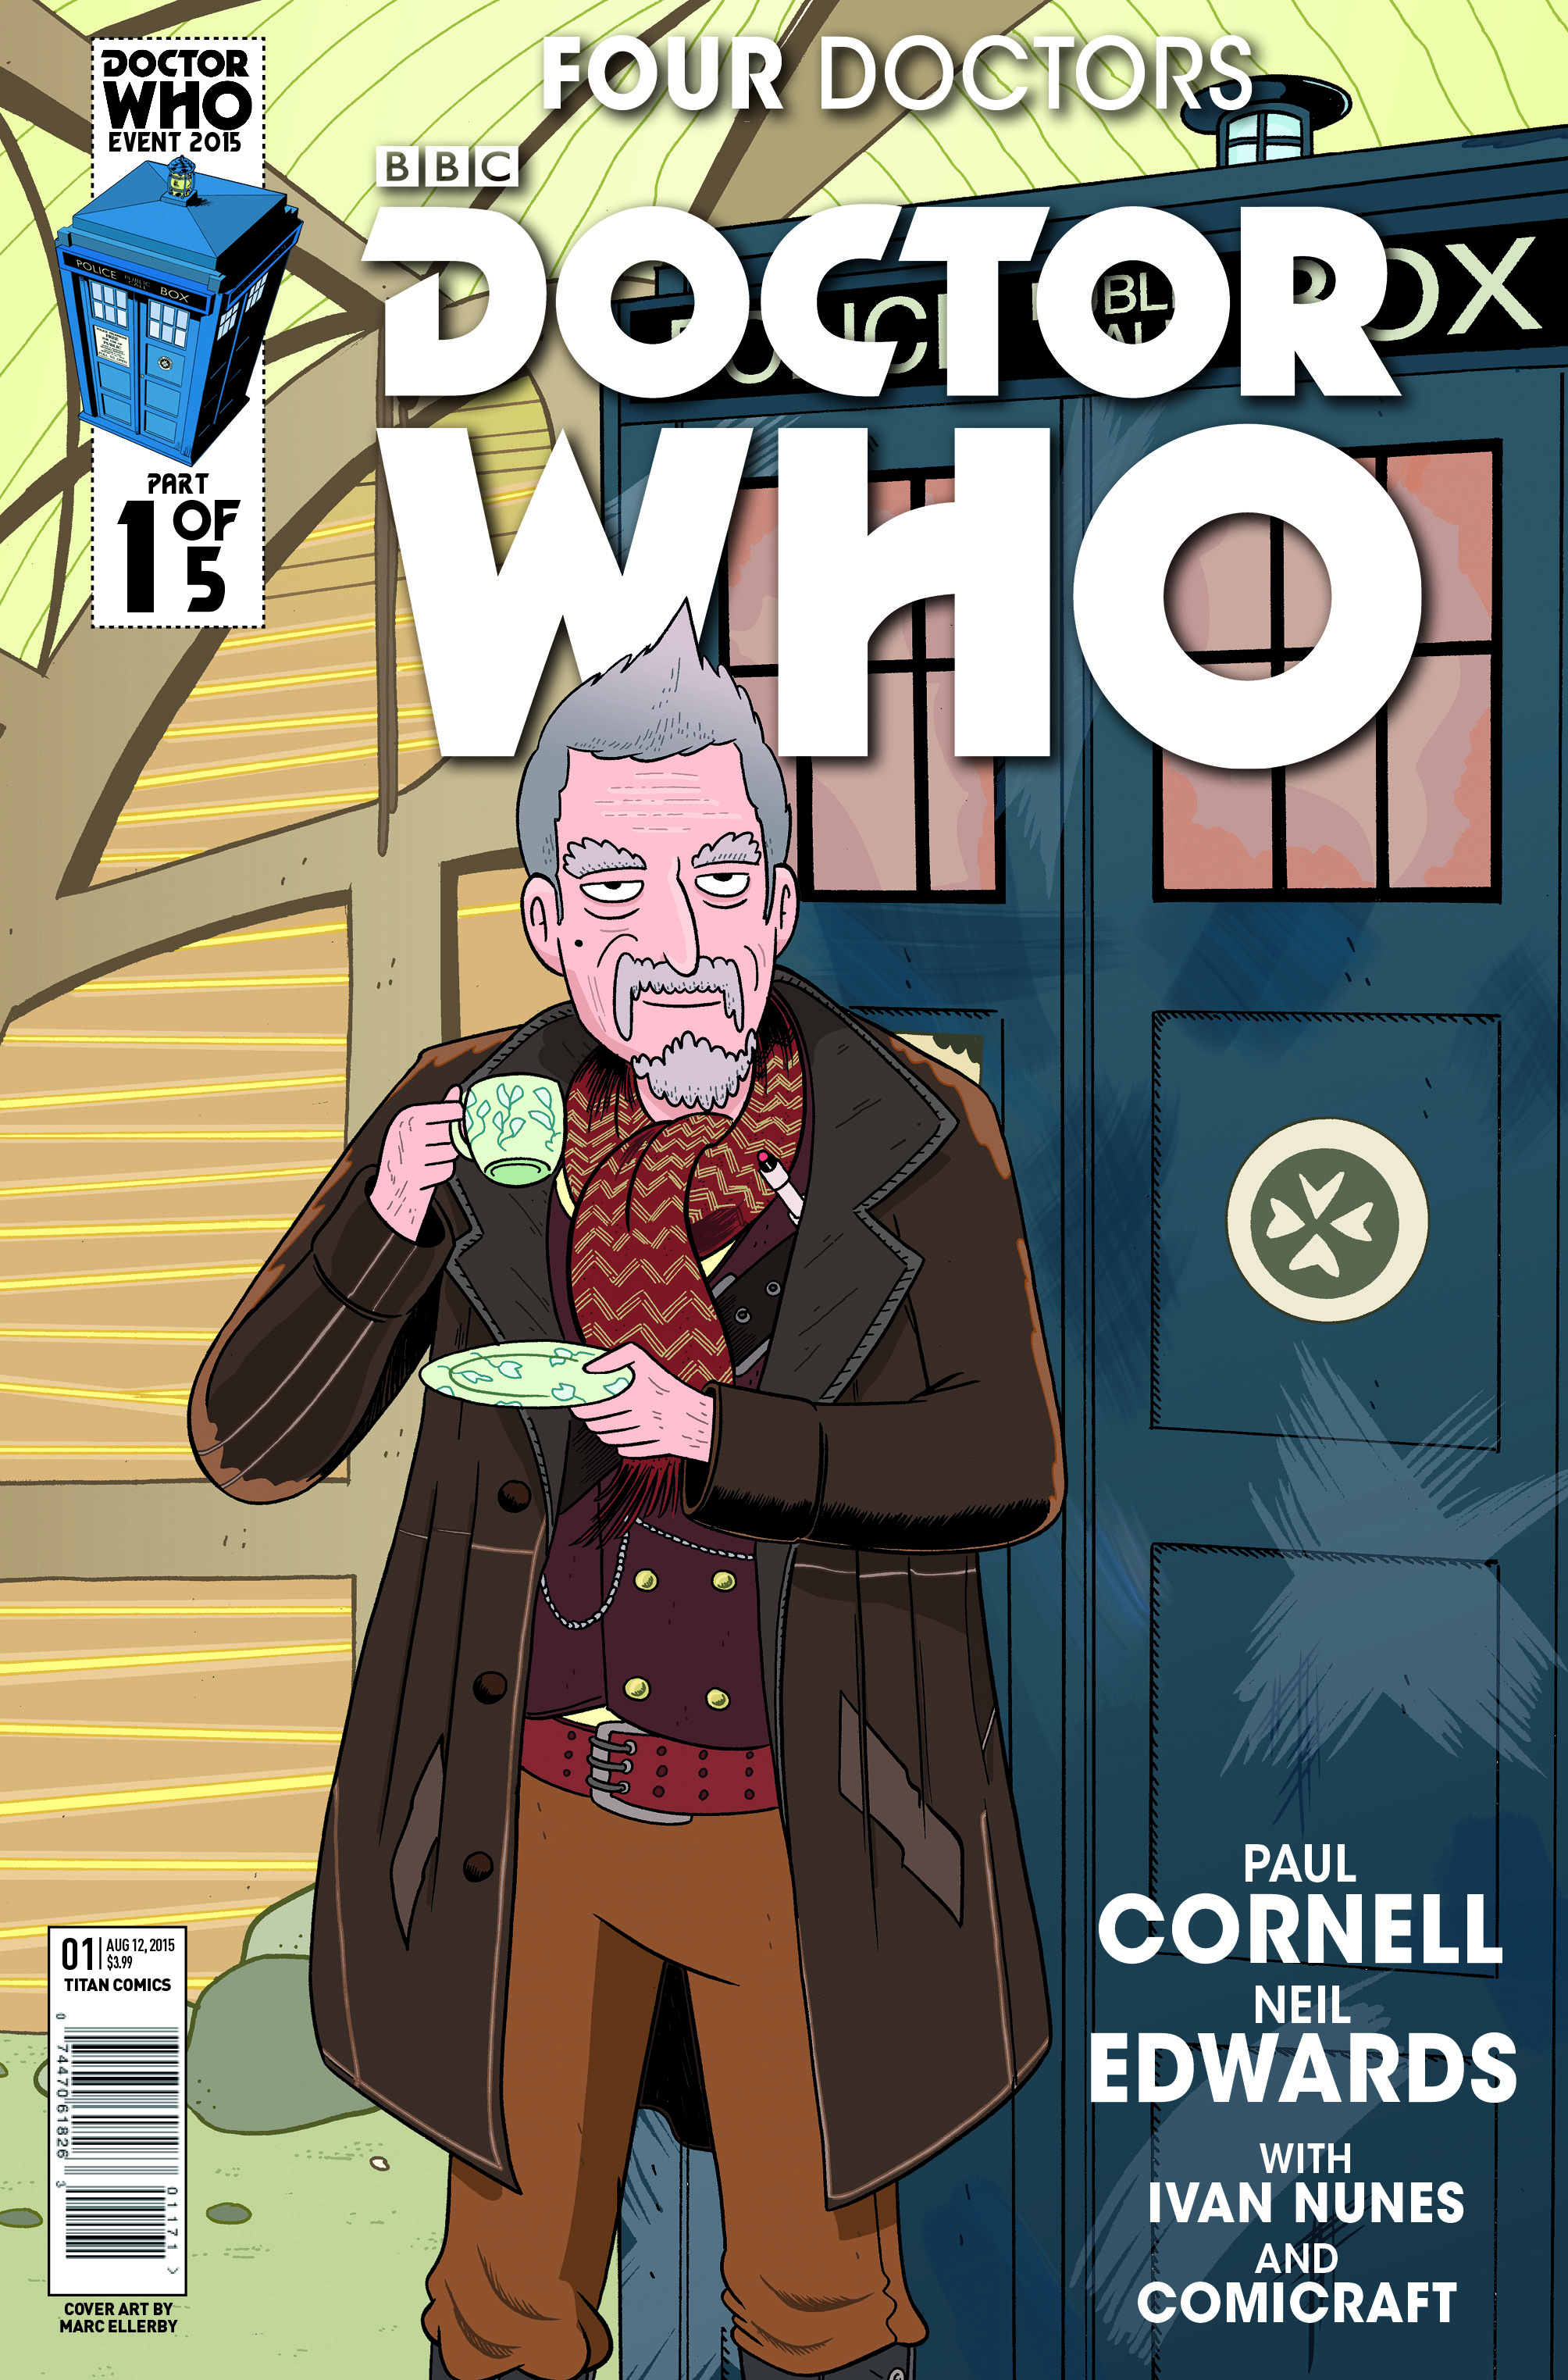 THE WHO SHOP VARIANT COVER BY MARC ELLERBY